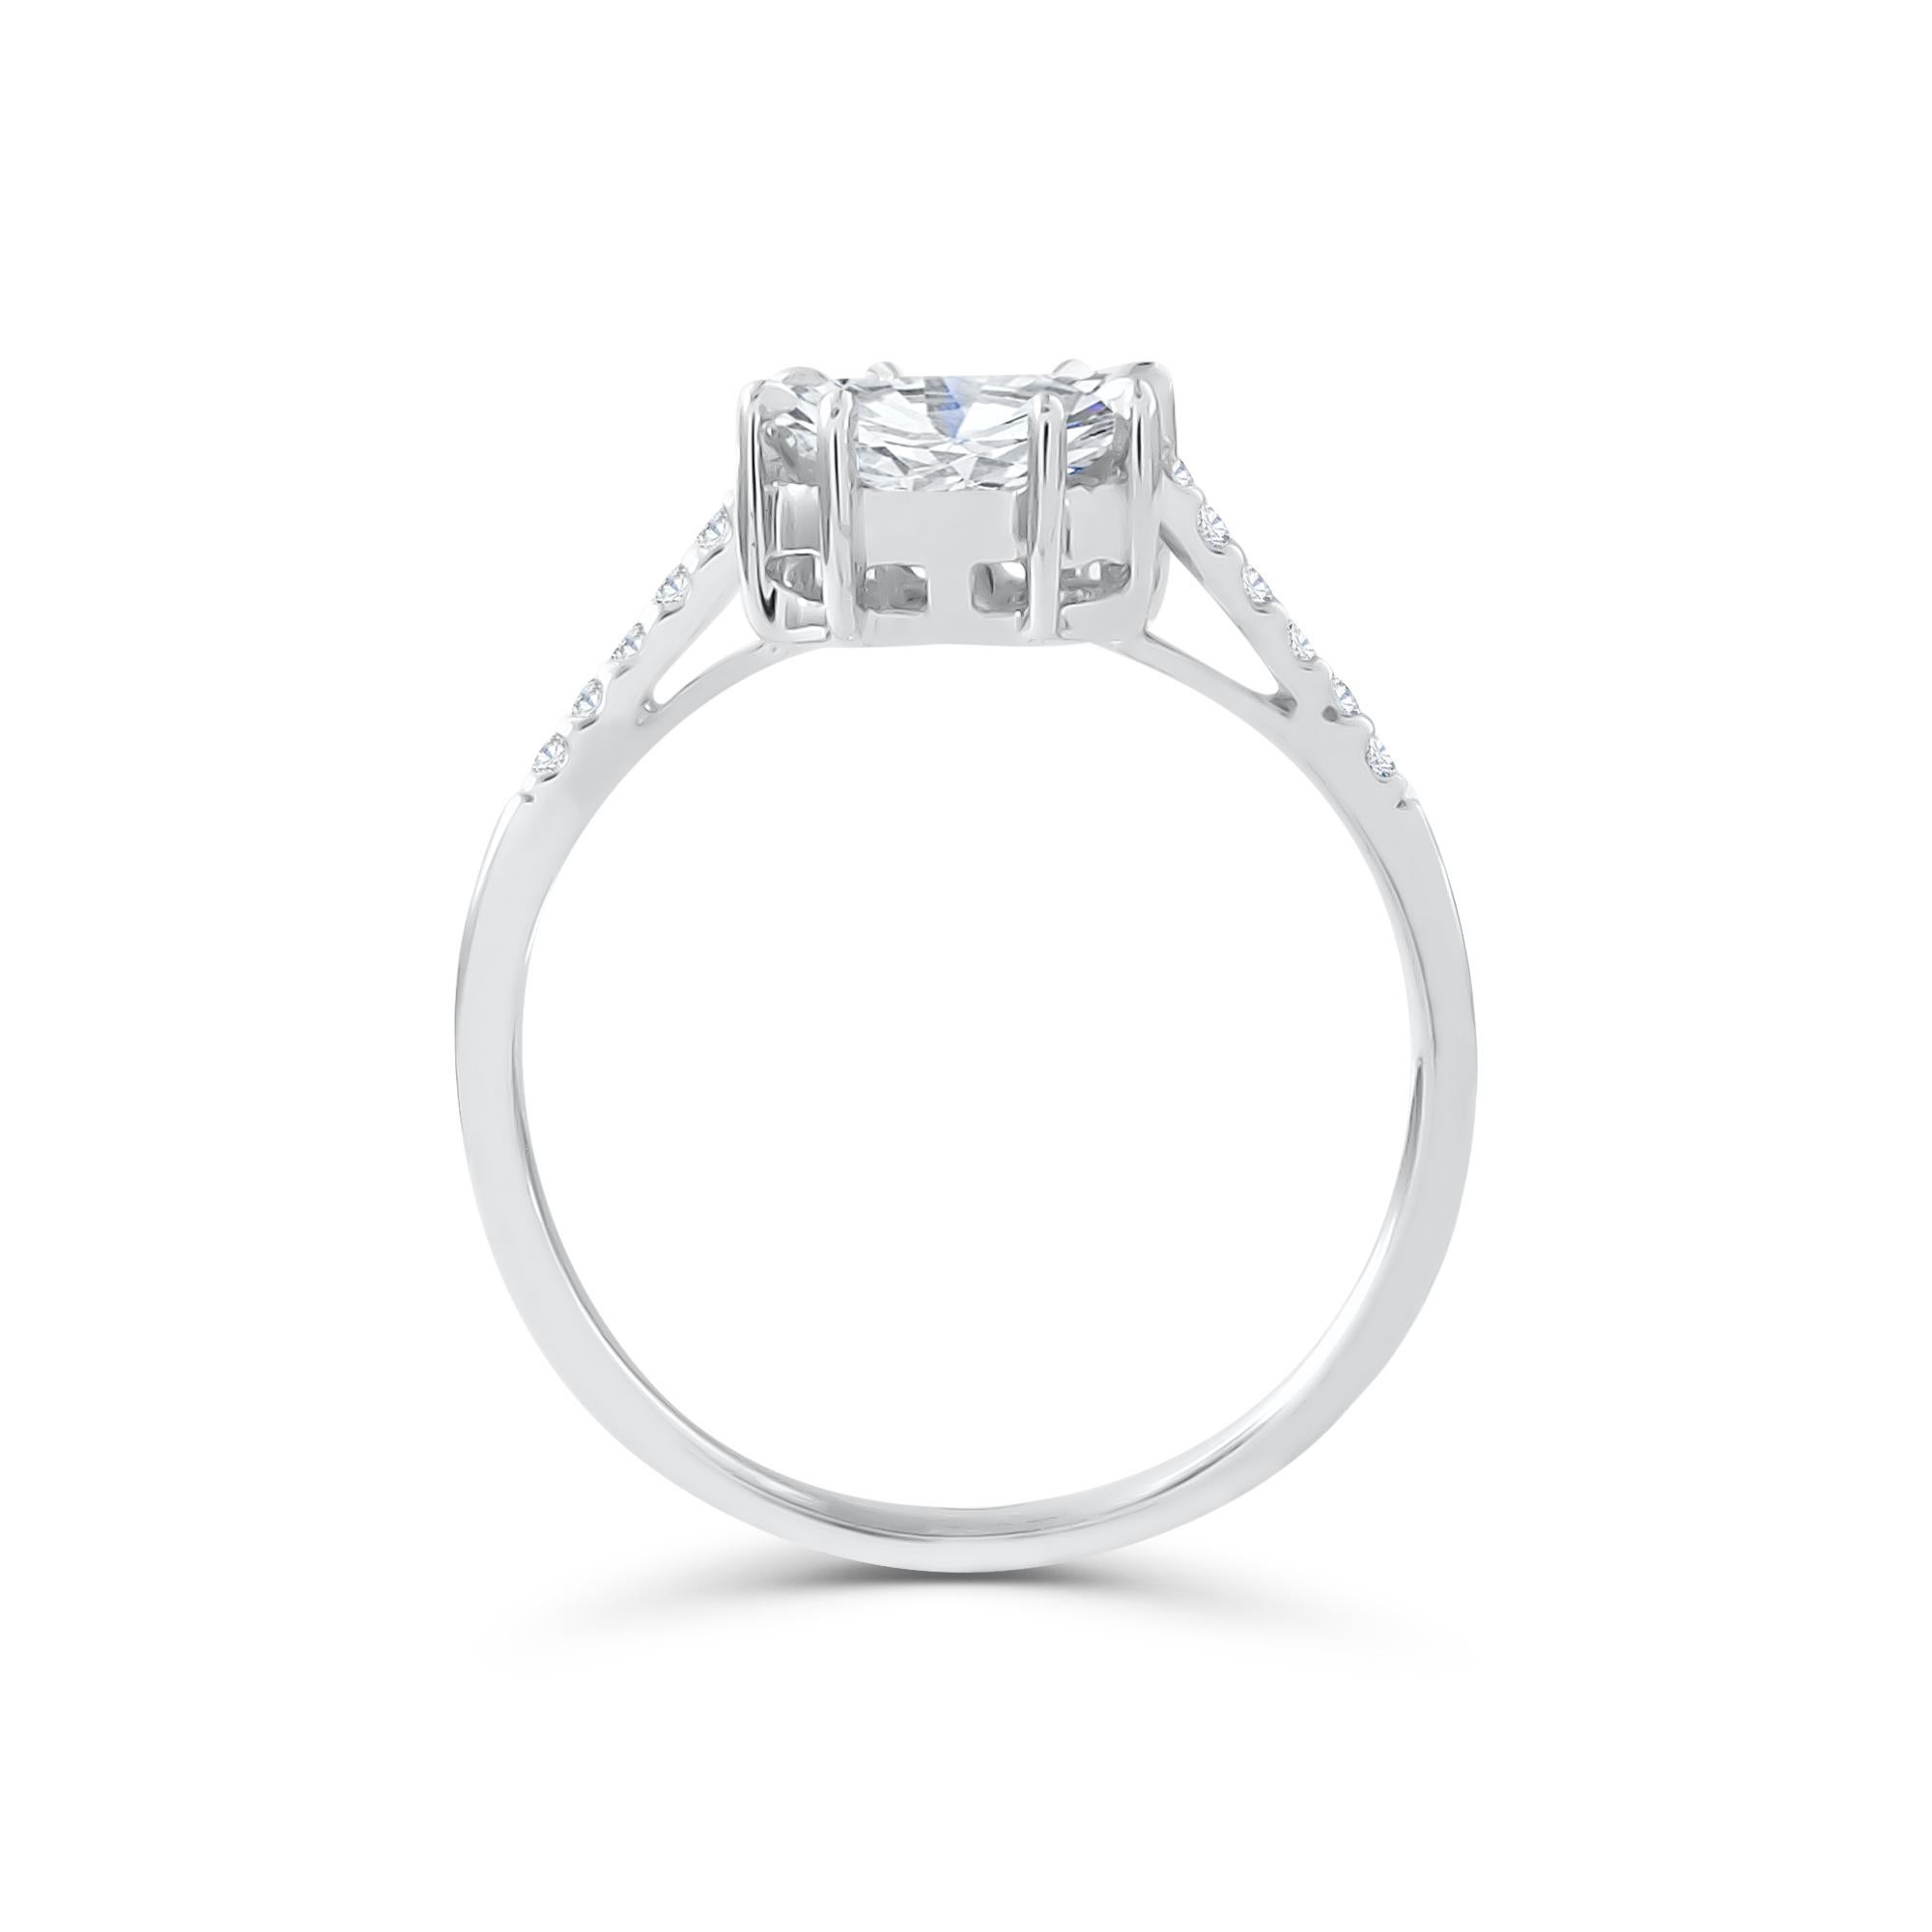 This diamond ring has an Emerald shape Illusion (Pie Cut Diamonds) to create the look of a 3.00 carat single Emerald-cut stone, Handcrafted in 18 karat white gold. This Ring will add a touch of sophistication to both daytime and evening looks.

Our